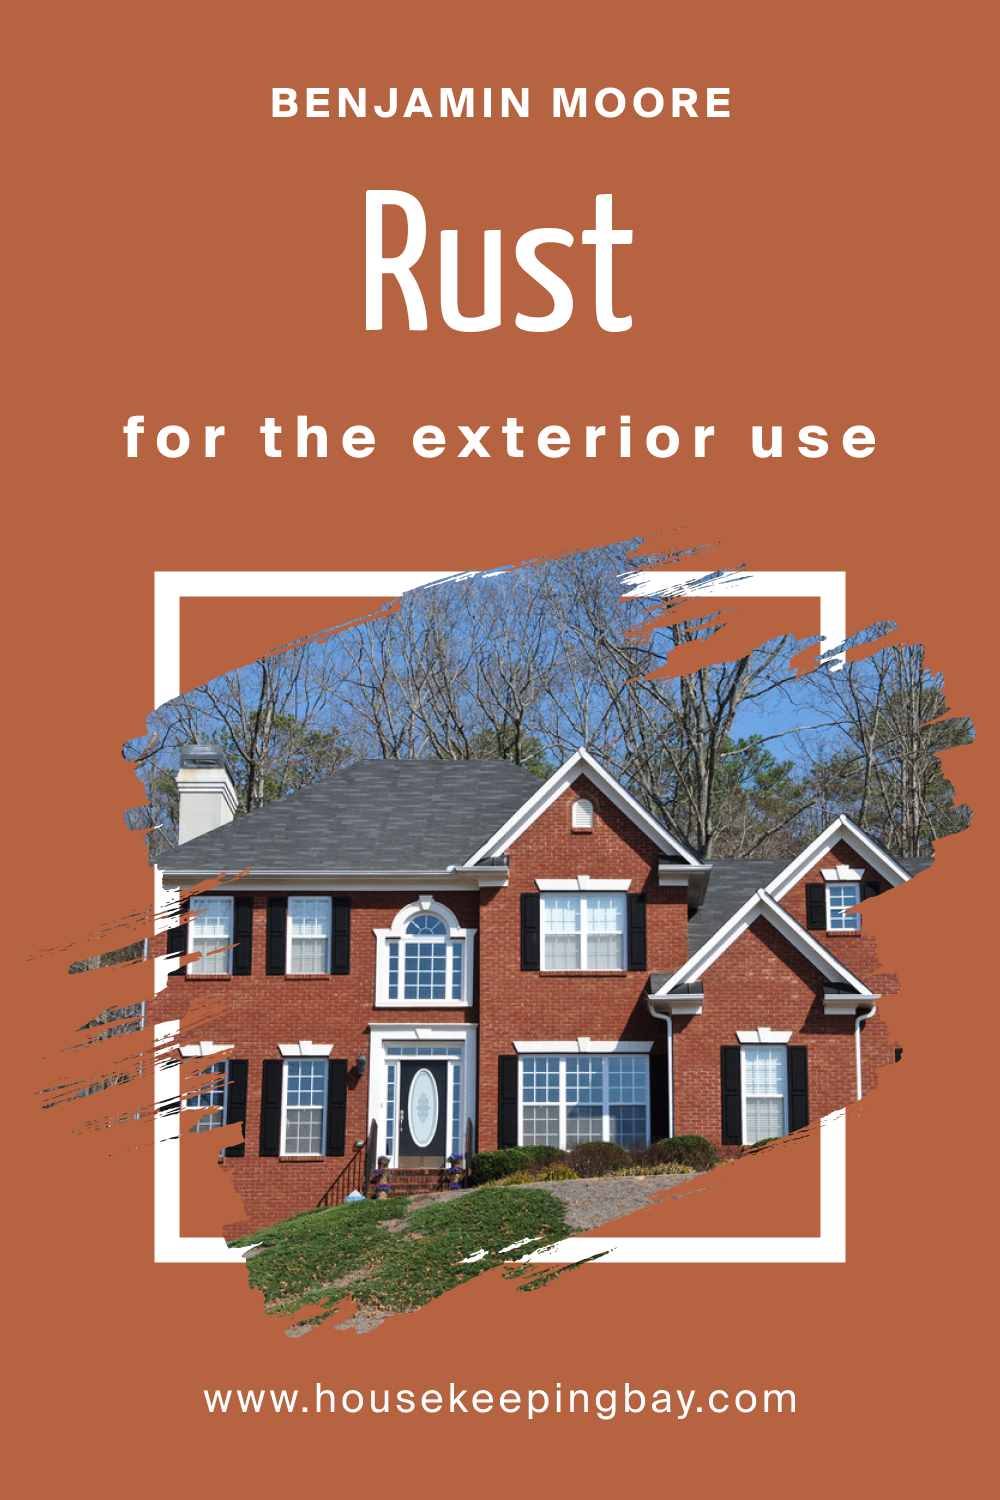 How to Use BM Rust 2175-30 for an Exterior?